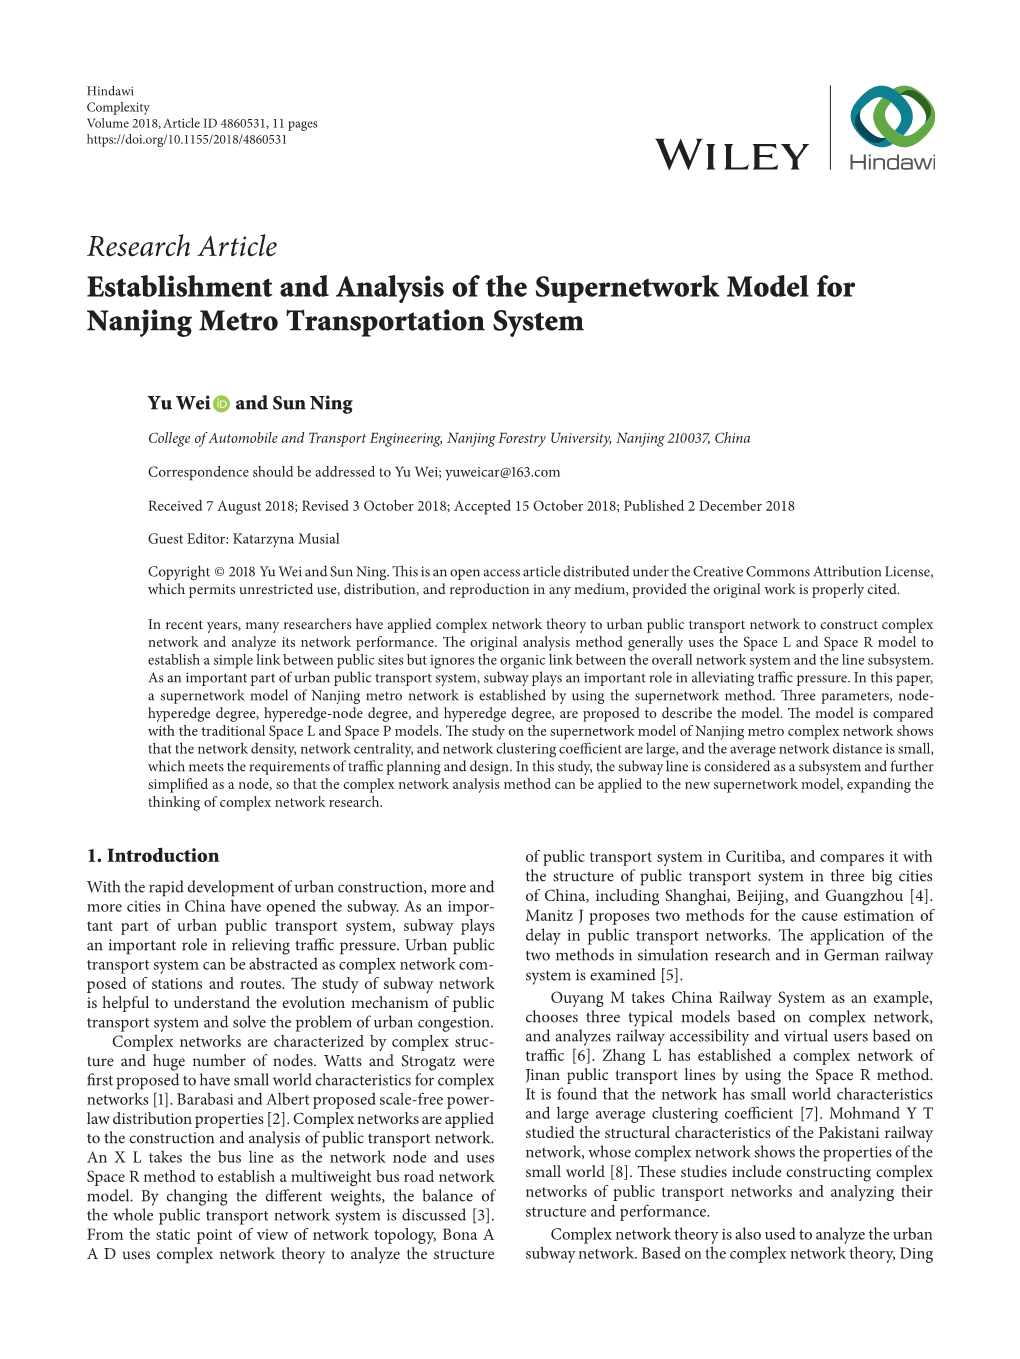 Establishment and Analysis of the Supernetwork Model for Nanjing Metro Transportation System